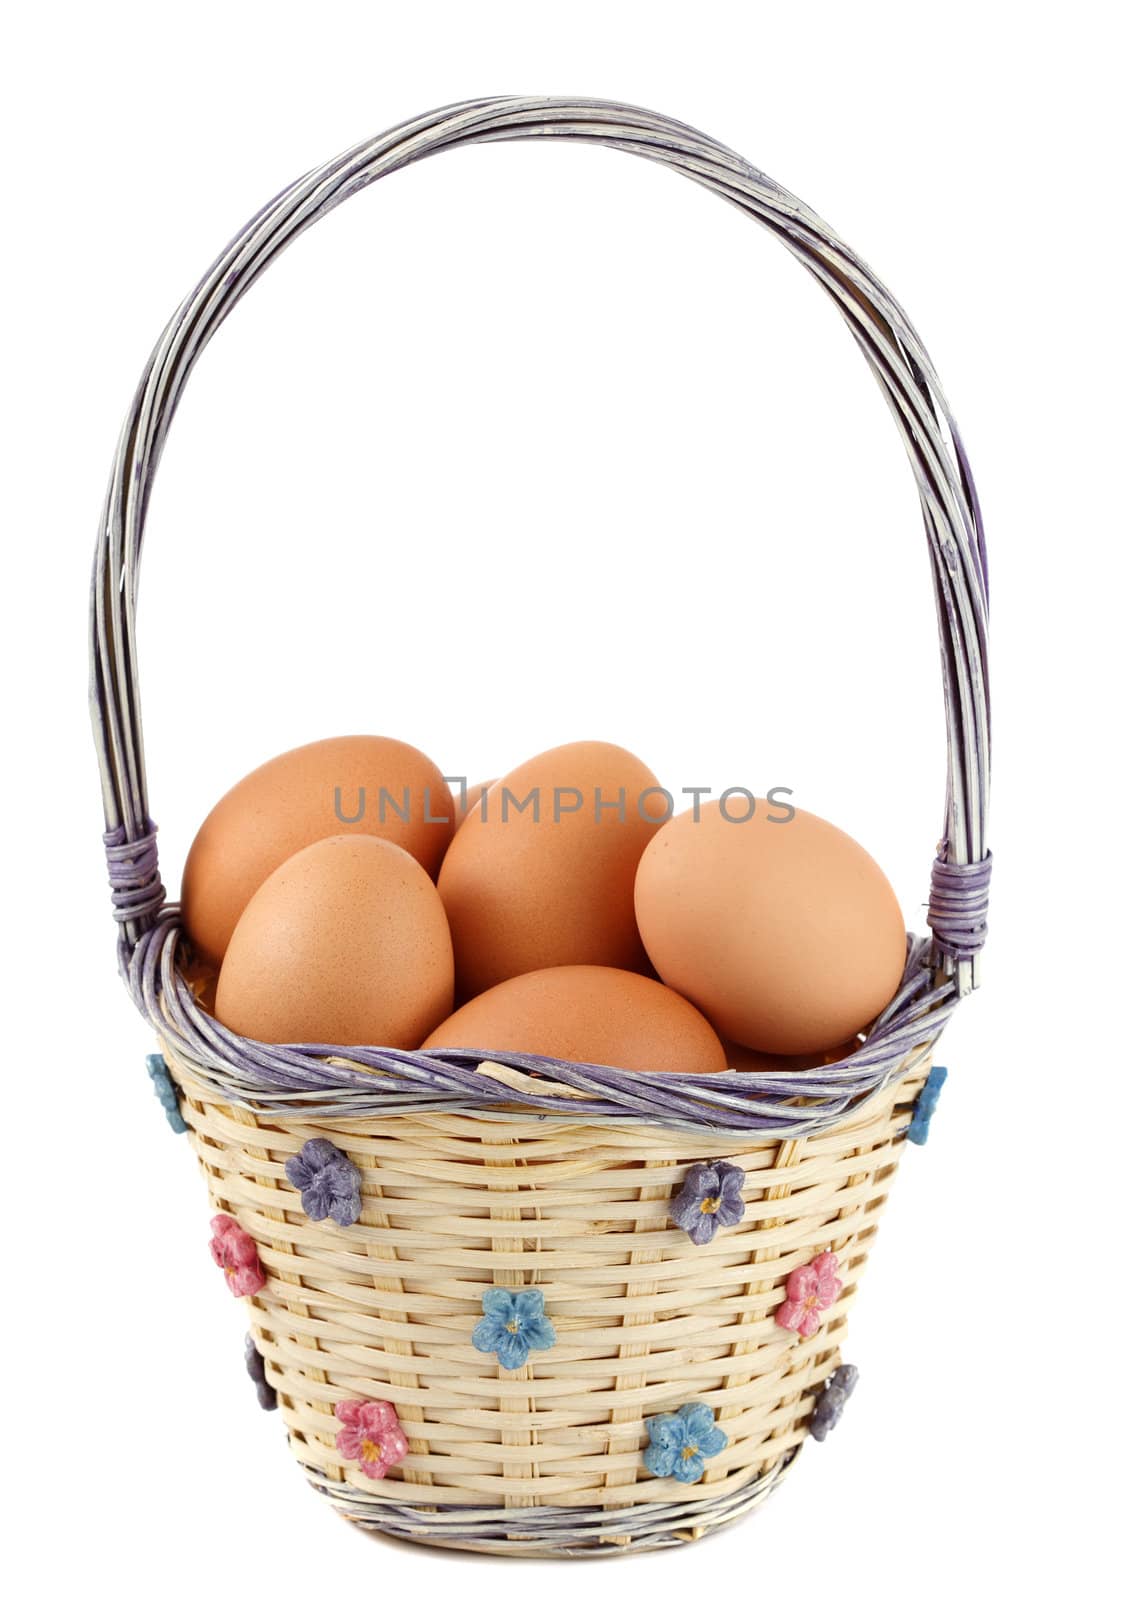 fresh whole brown eggs on wicker basket, white background